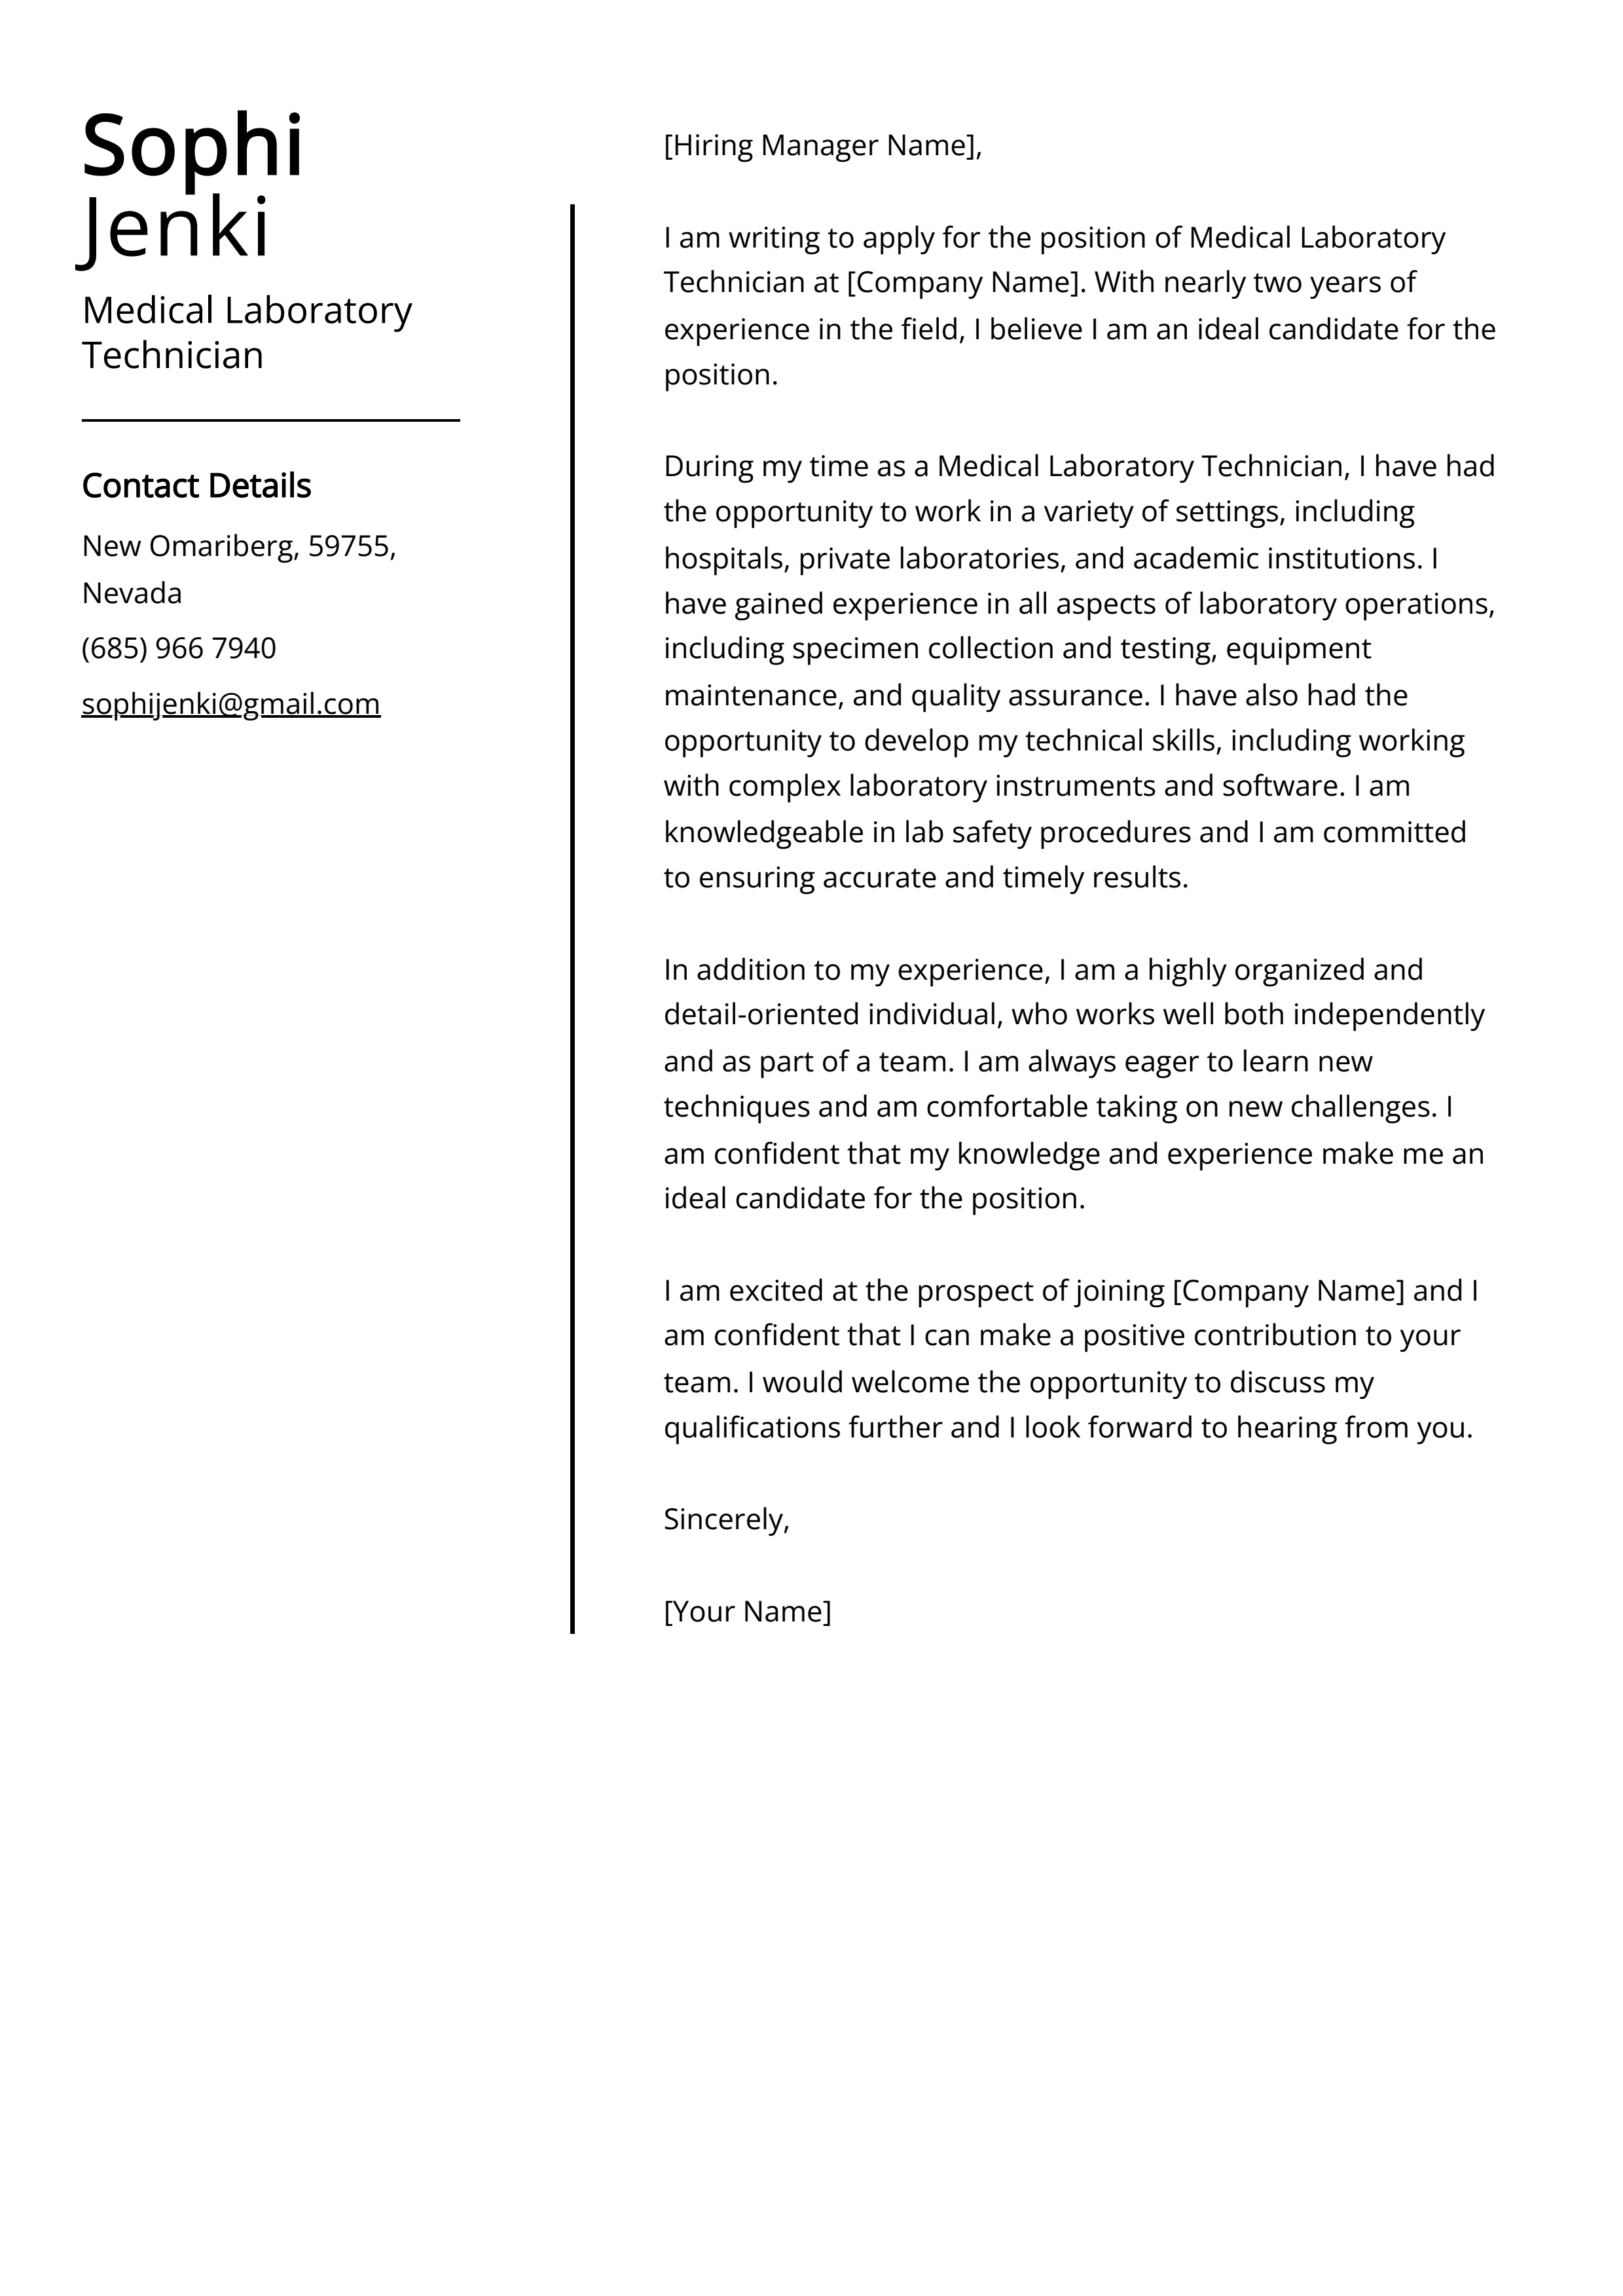 Medical Laboratory Technician Cover Letter Example